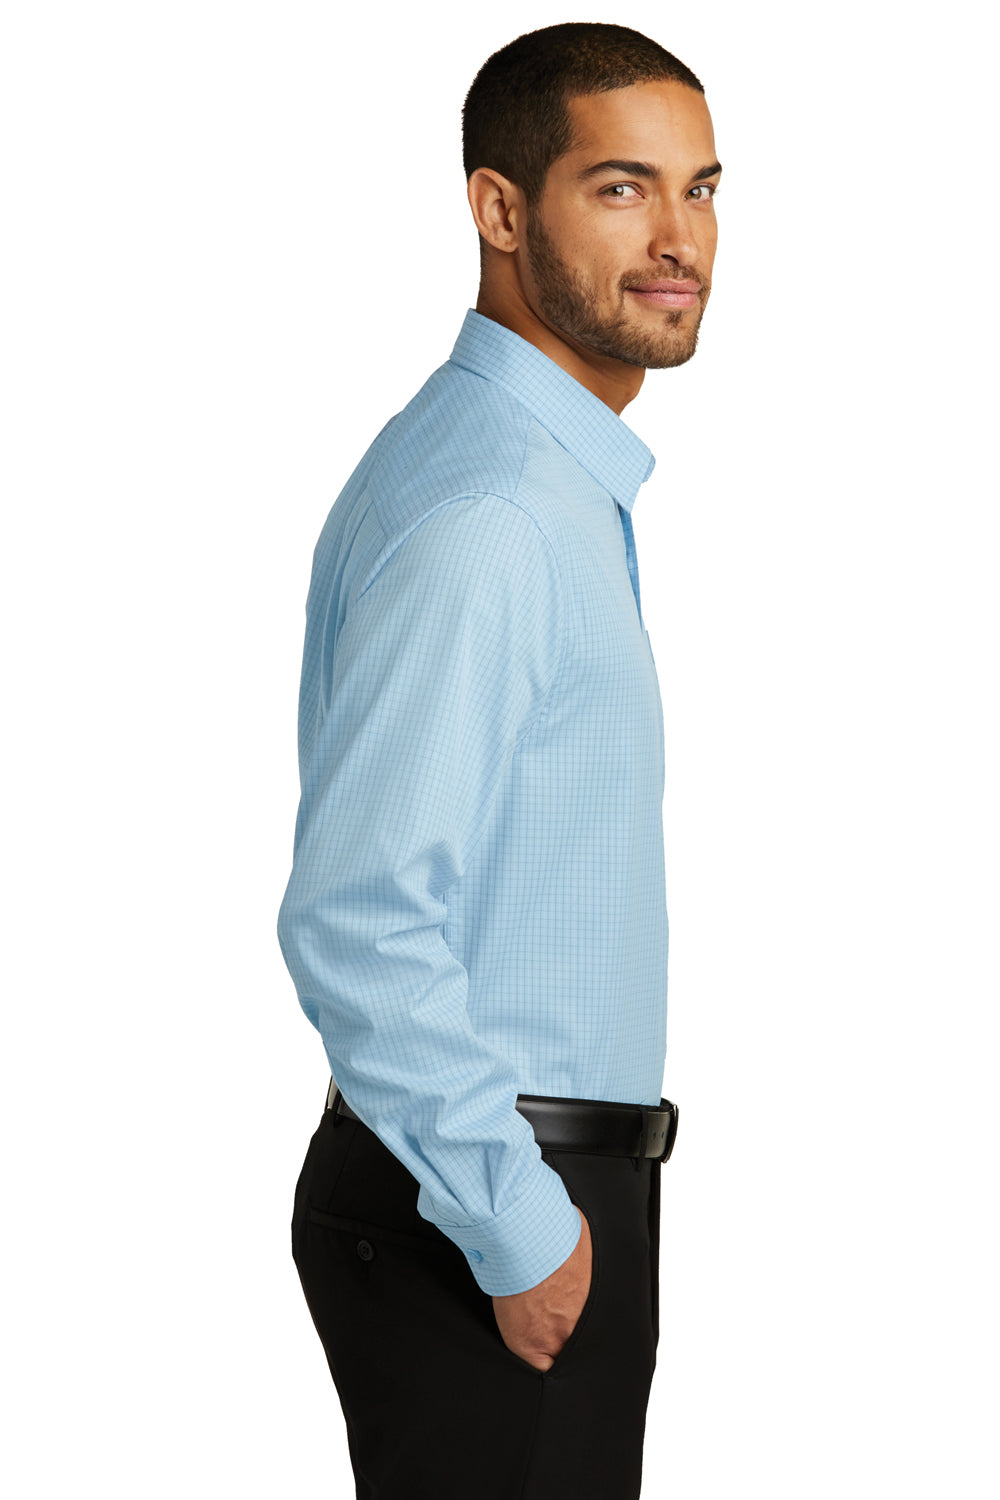 Port Authority W643 Mens Easy Care Wrinkle Resistant Long Sleeve Button Down Shirt w/ Pocket Heritage Blue/Royal Blue Side